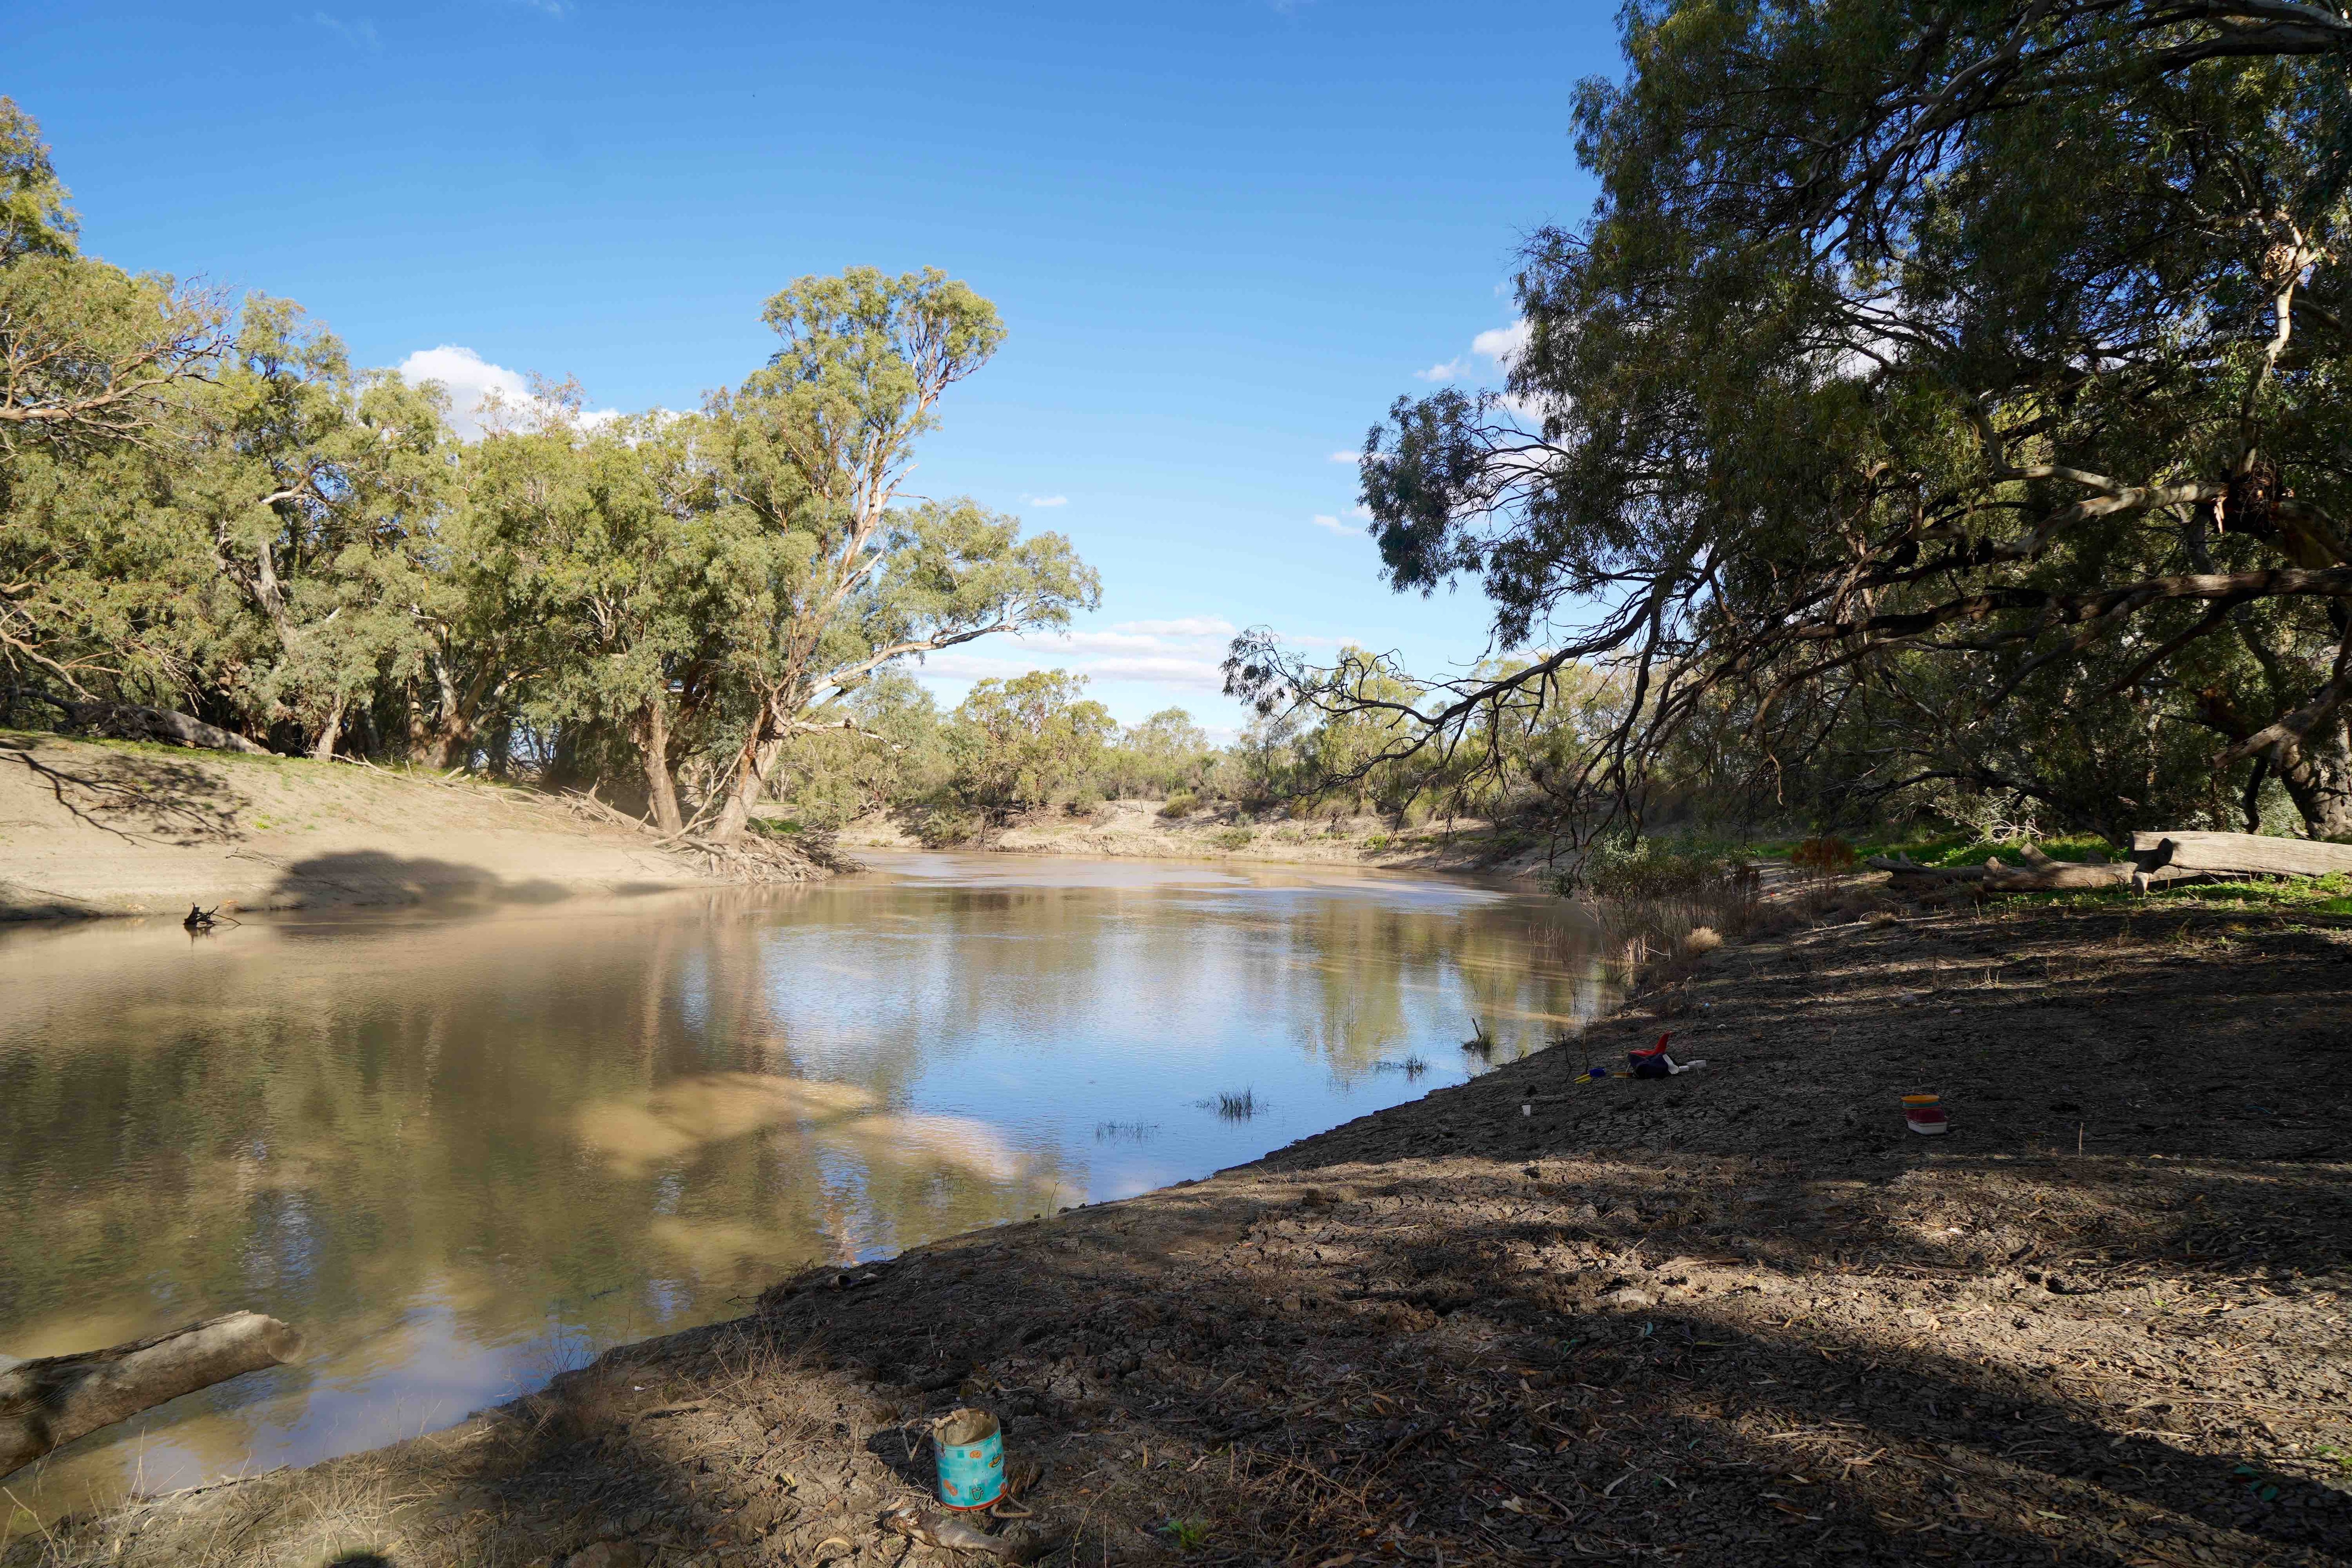 Wilcannia is located on the Darling River.